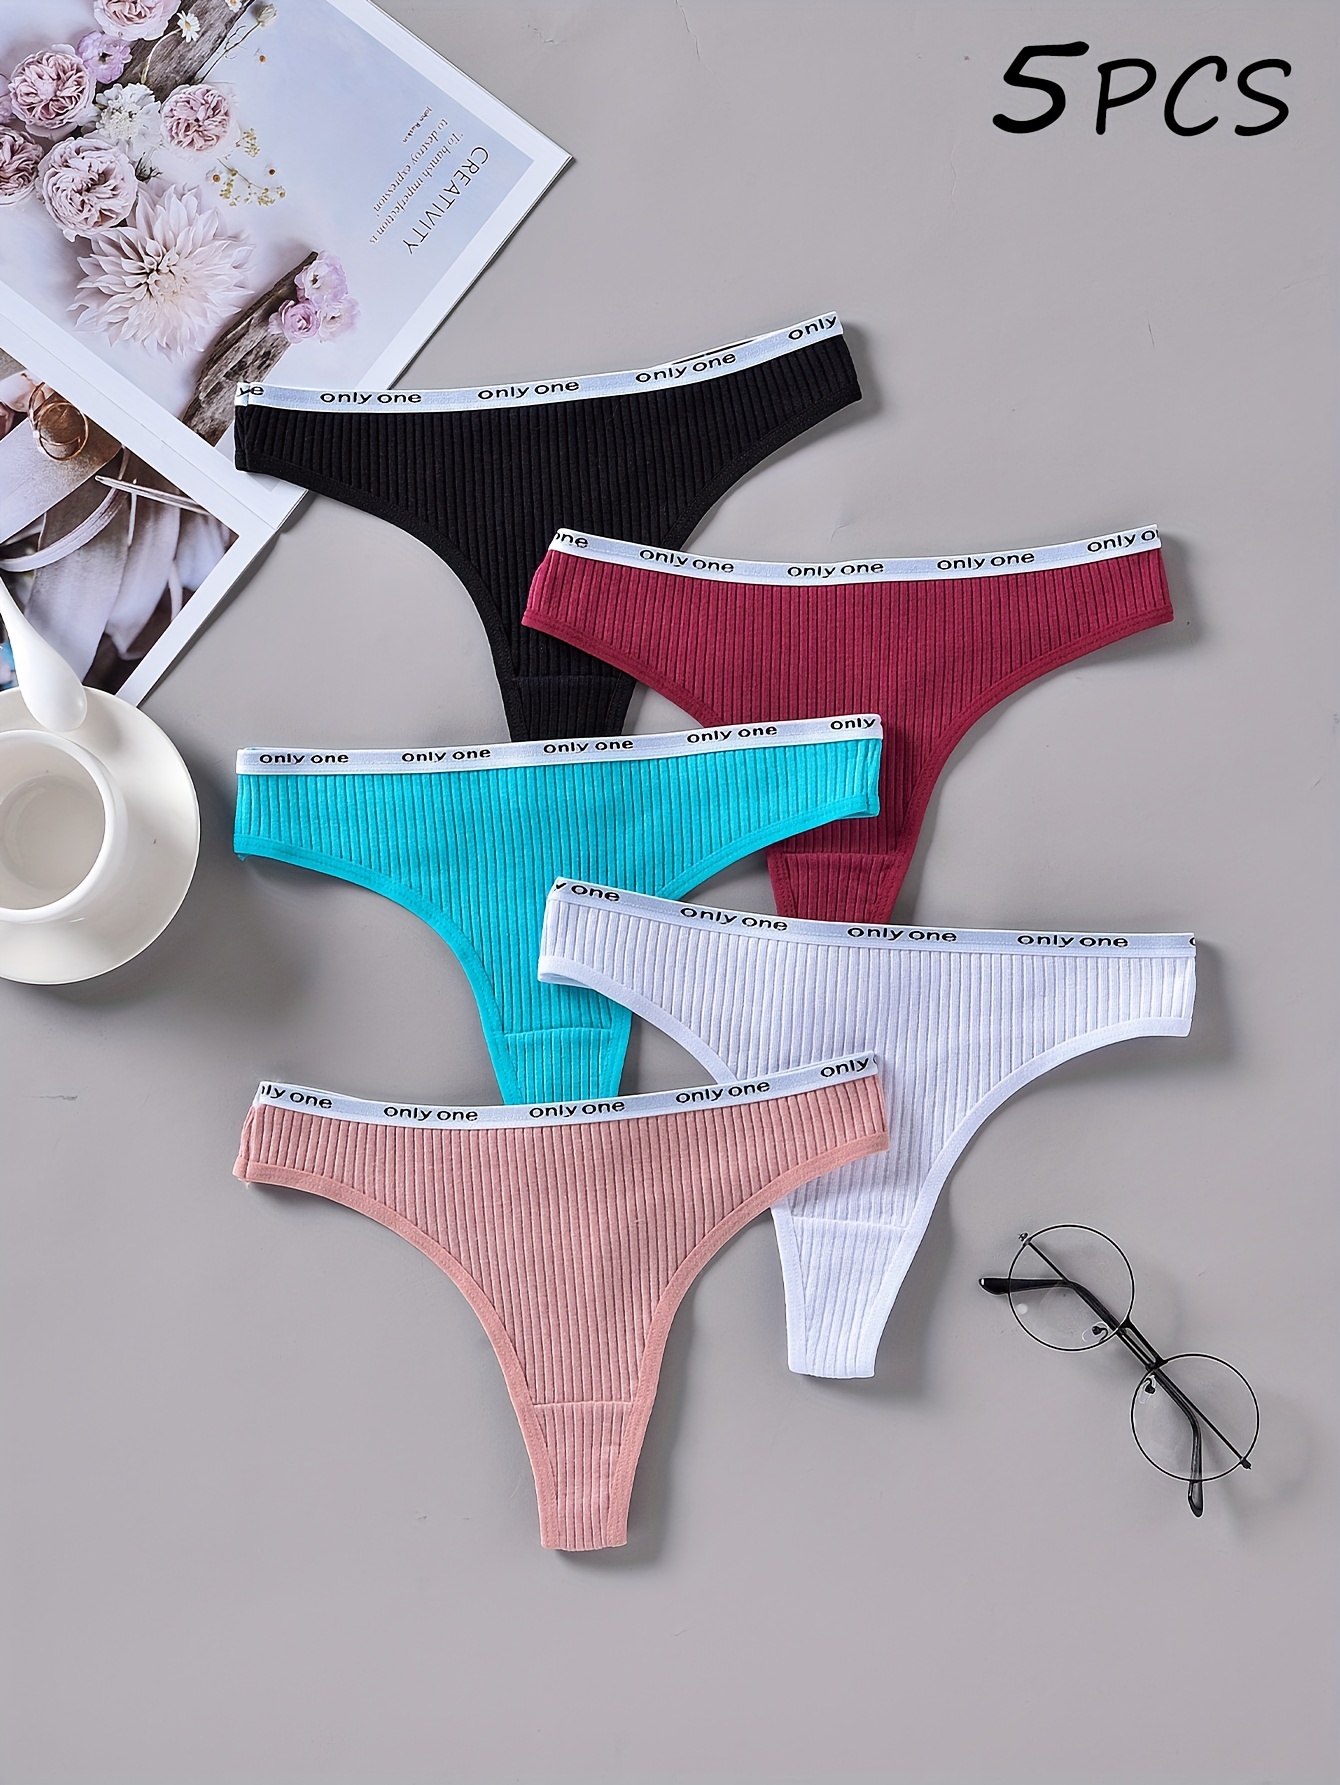 [3 Pack] Colorful Sports Thongs, Breathable Low-Cut Soft Cotton Thong  Panties, Women's Lingerie & Underwear